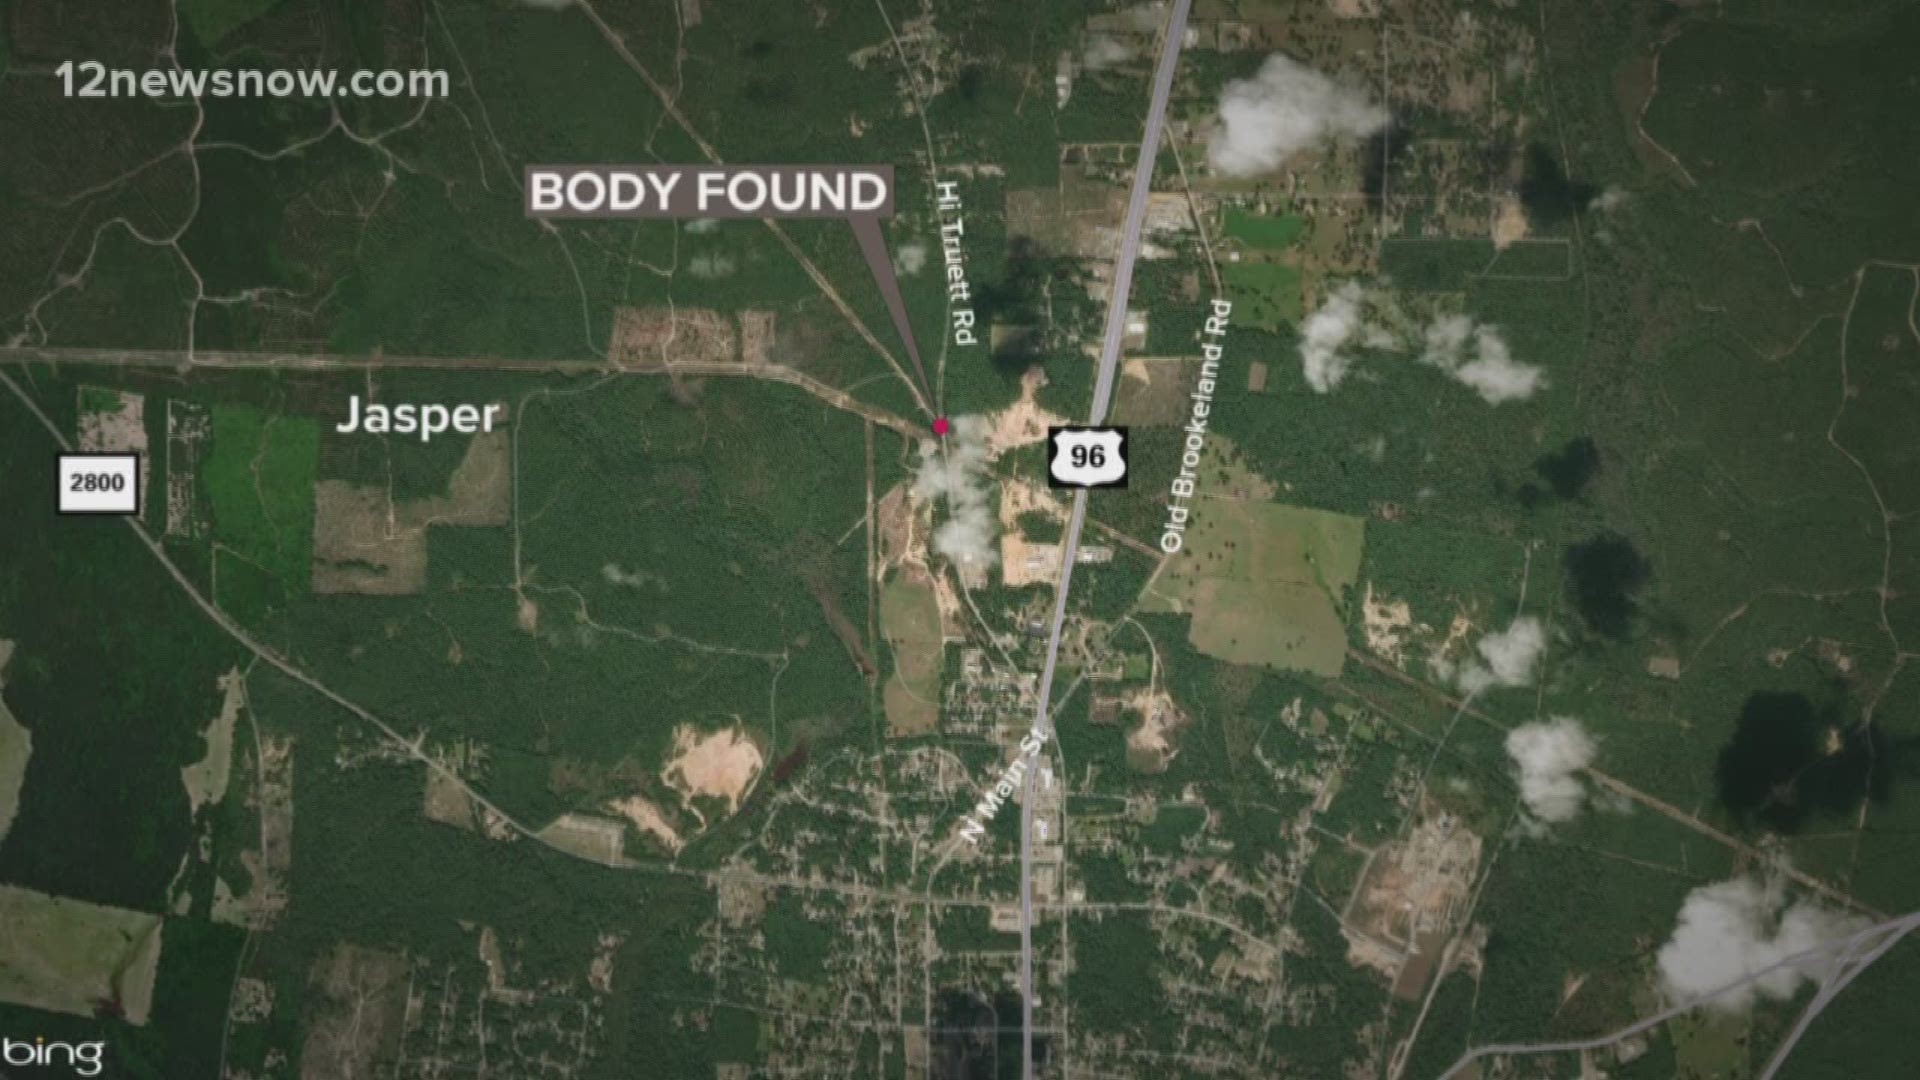 Family of missing Jasper man uses cellphone app to track him, discover his body in the woods